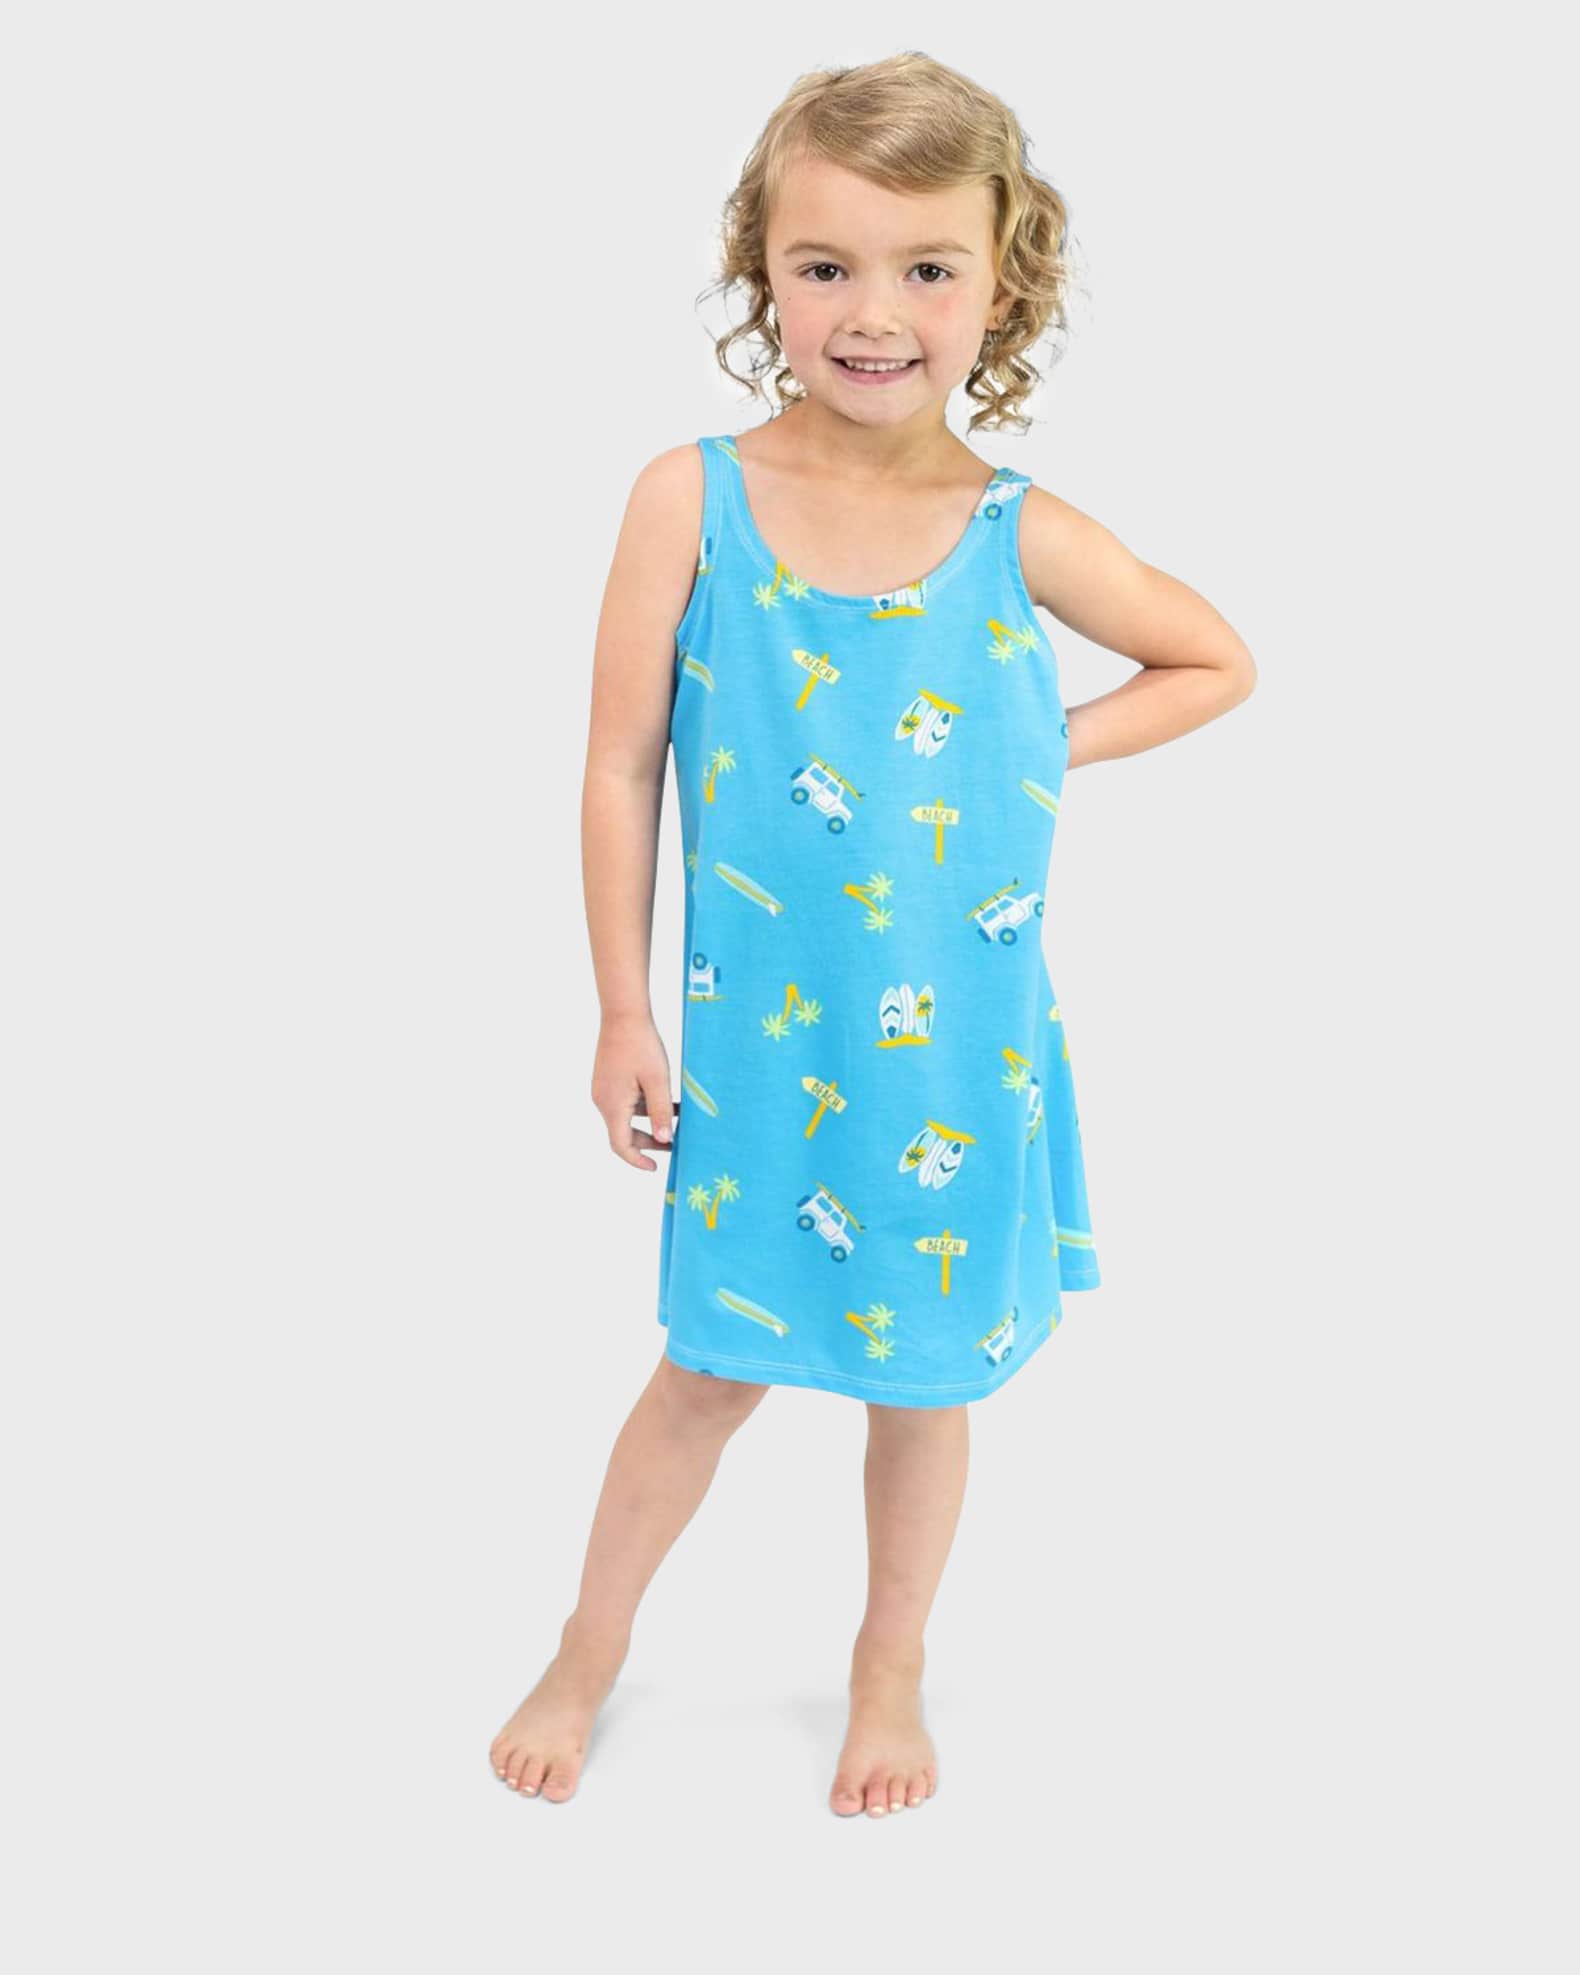 Lovey&Grink Girl's Surf's Up Tank Dress, Size XS-L | Neiman Marcus